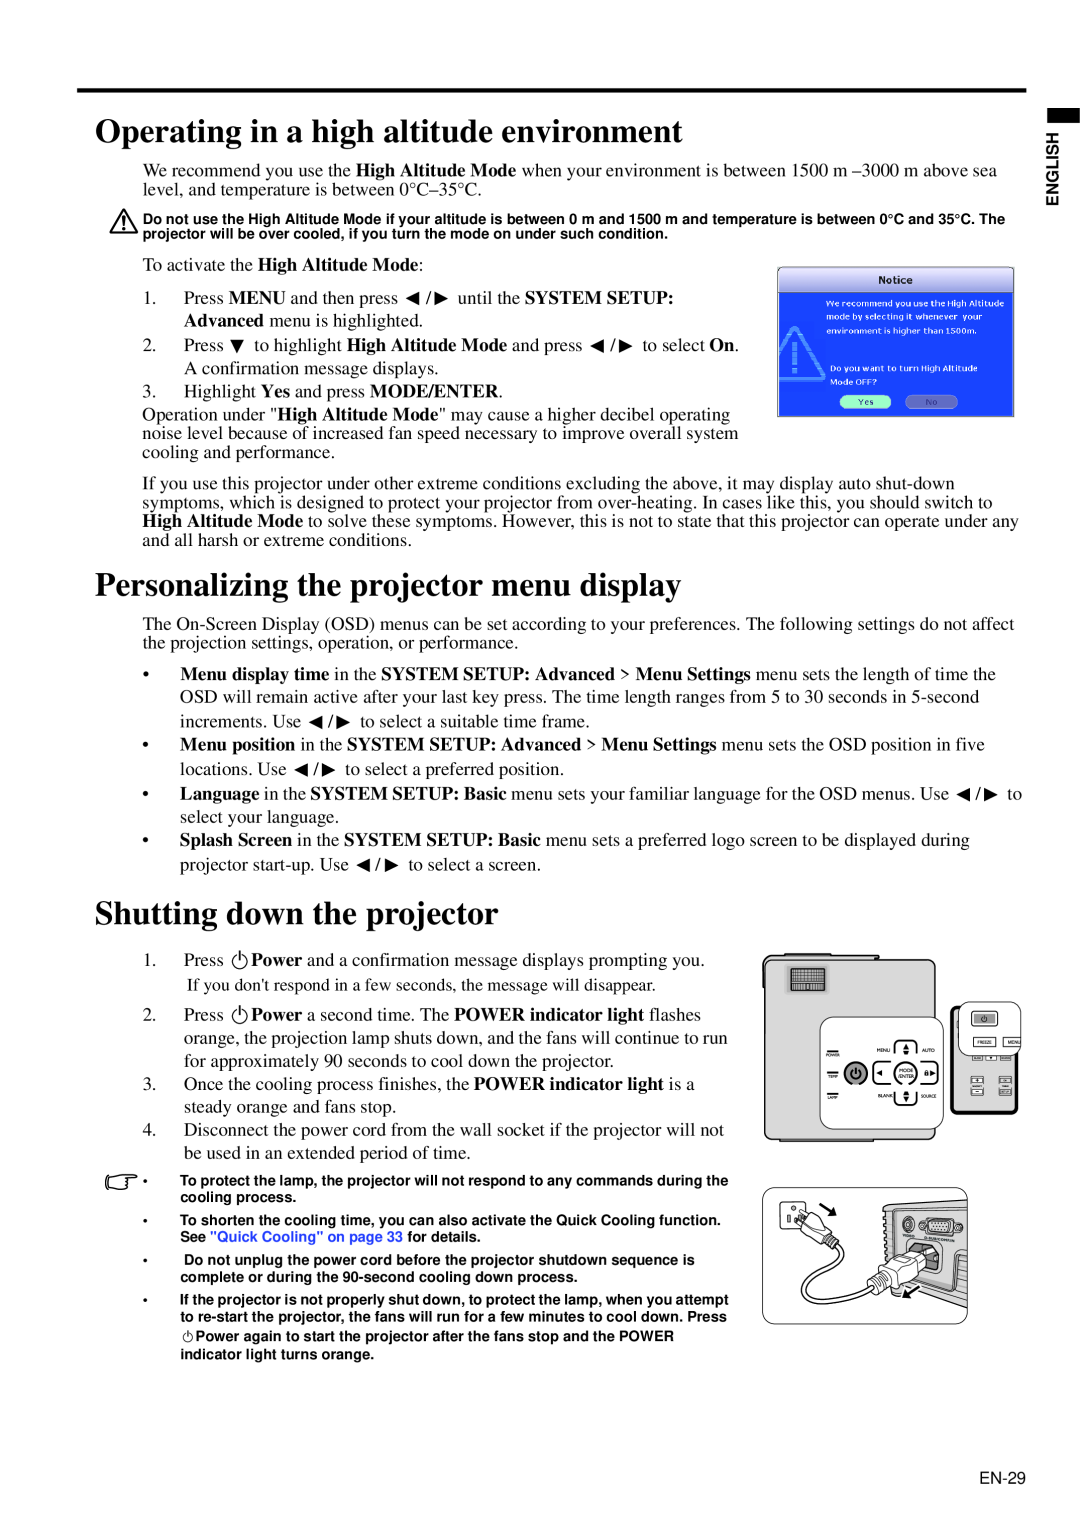 Mitsubishi Electronics XD95U user manual Operating in a high altitude environment, Personalizing the projector menu display 